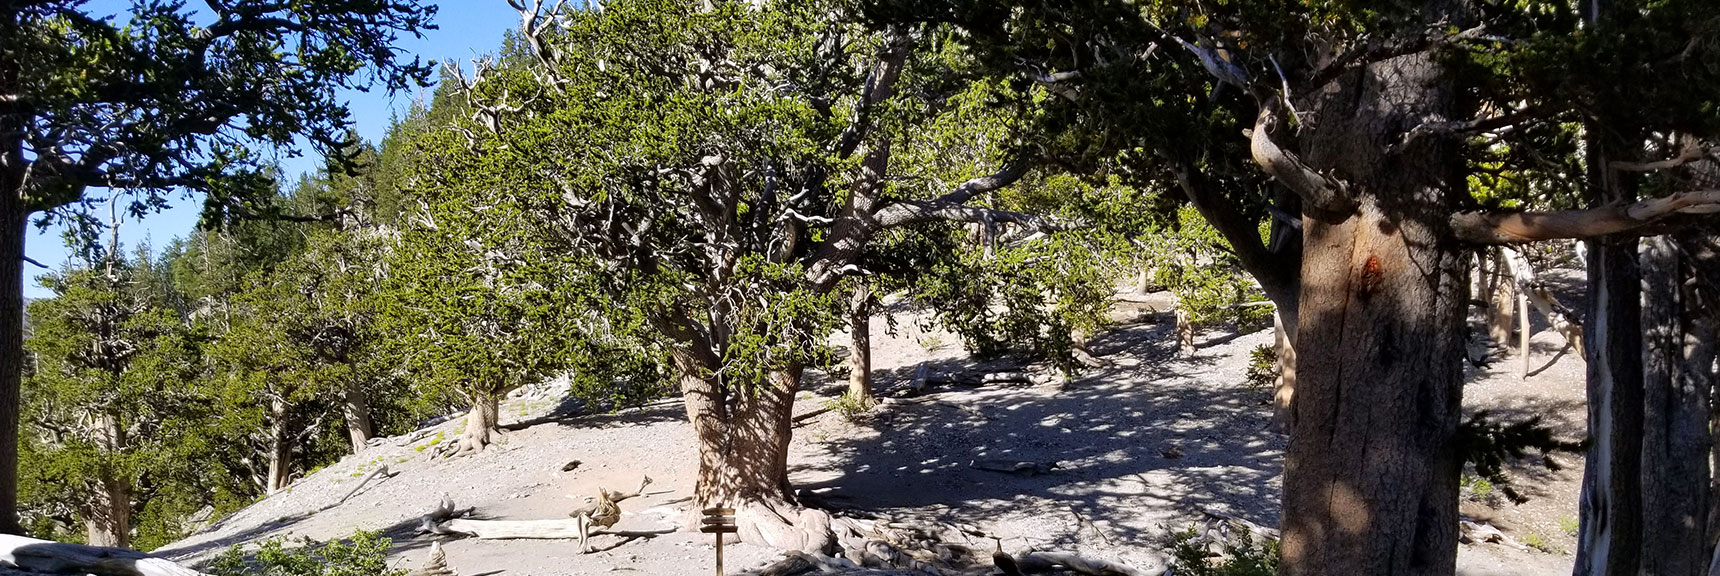 First View of Rain Tree from the North Loop Trail in the Mt. Charleston Wilderness, Nevada